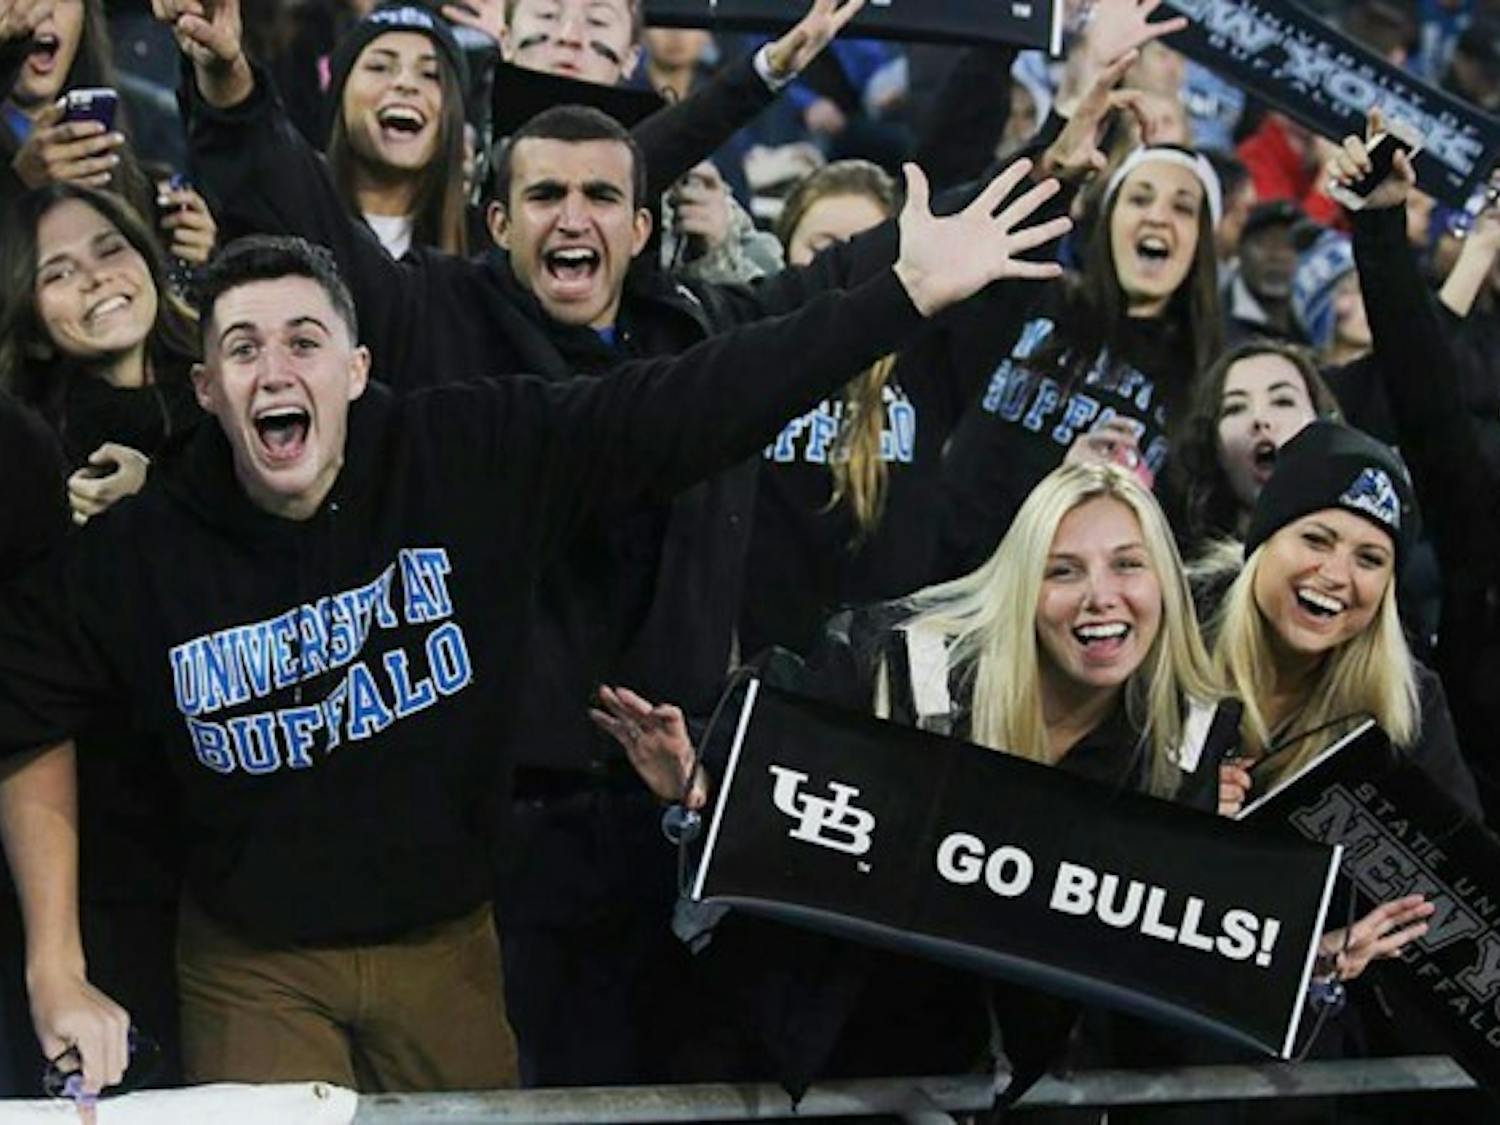 In UB Stadium&rsquo;s first ever home game televised on ESPN&#39;s flagship channel, Bulls fans &ldquo;blacked out&rdquo; the stadium, showing support for Buffalo&rsquo;s new black helmet that was unveiled Friday.
Cletus Emokpae, The Spectrum